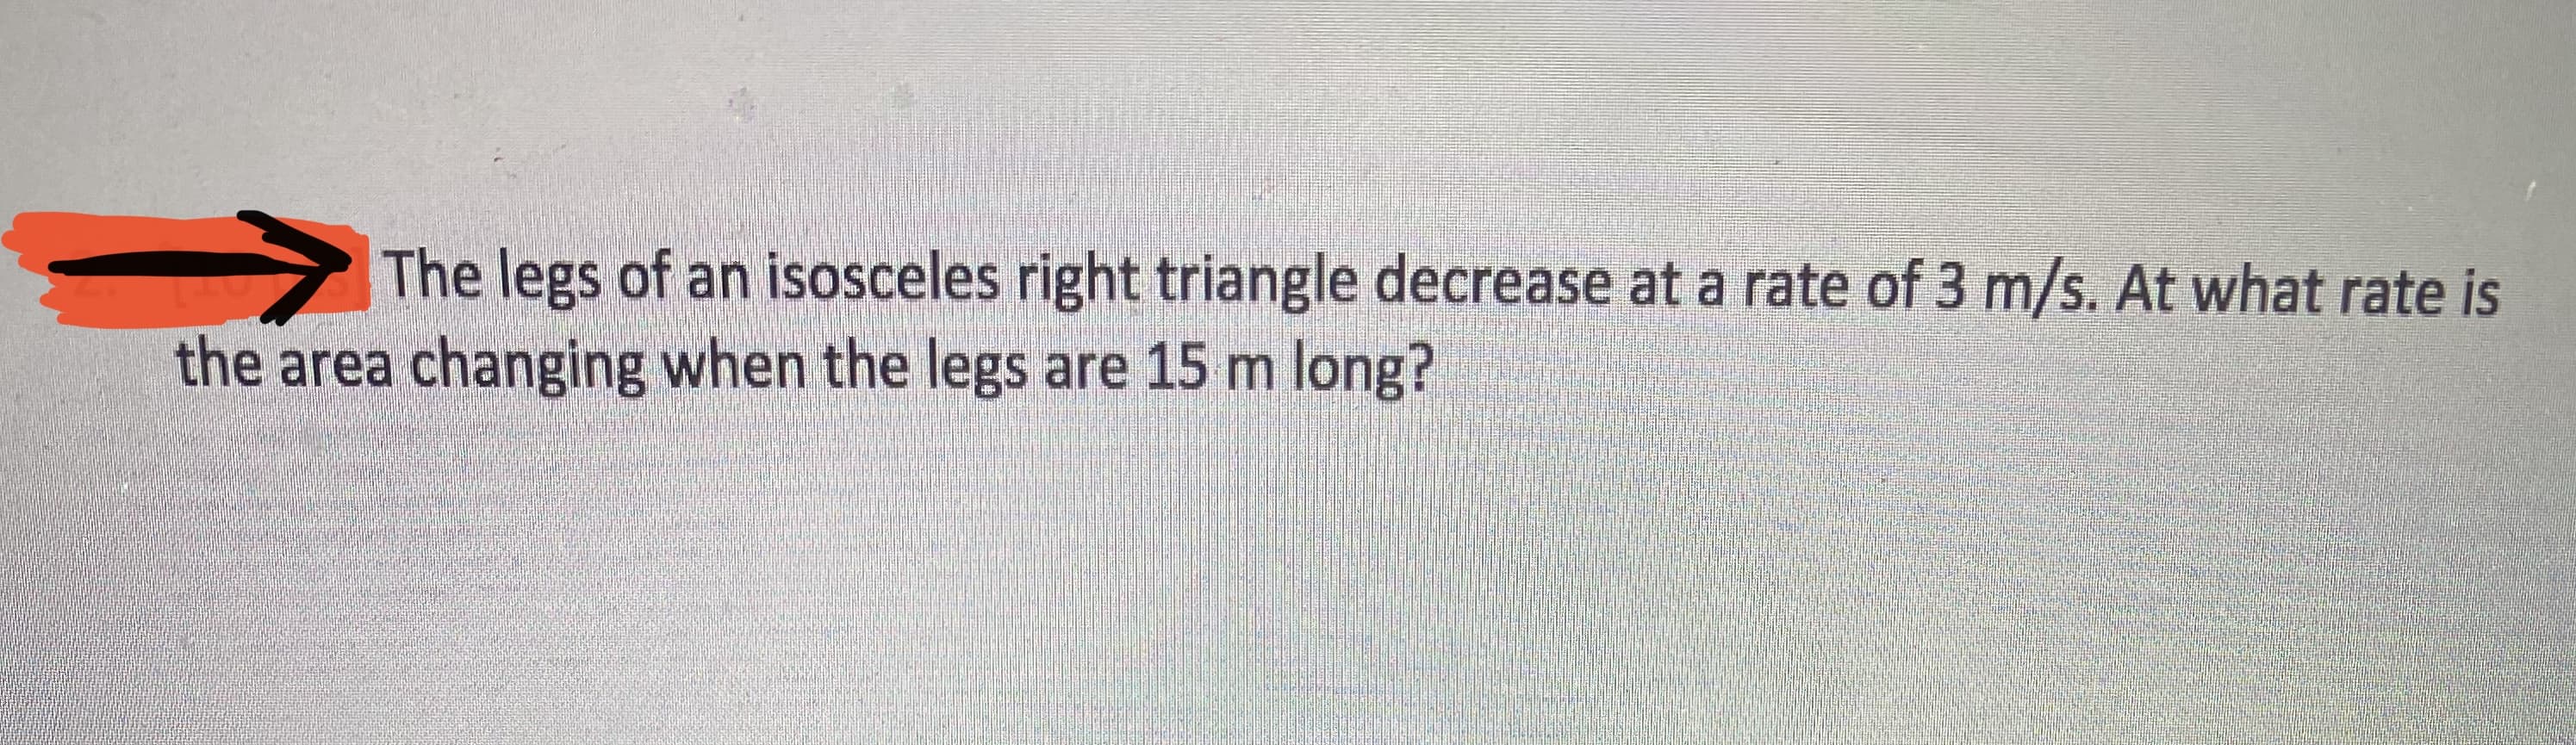 The legs of an isosceles right triangle decrease at a rate of 3 m/s. At what rate is
the area changing when the legs are 15 m long?
